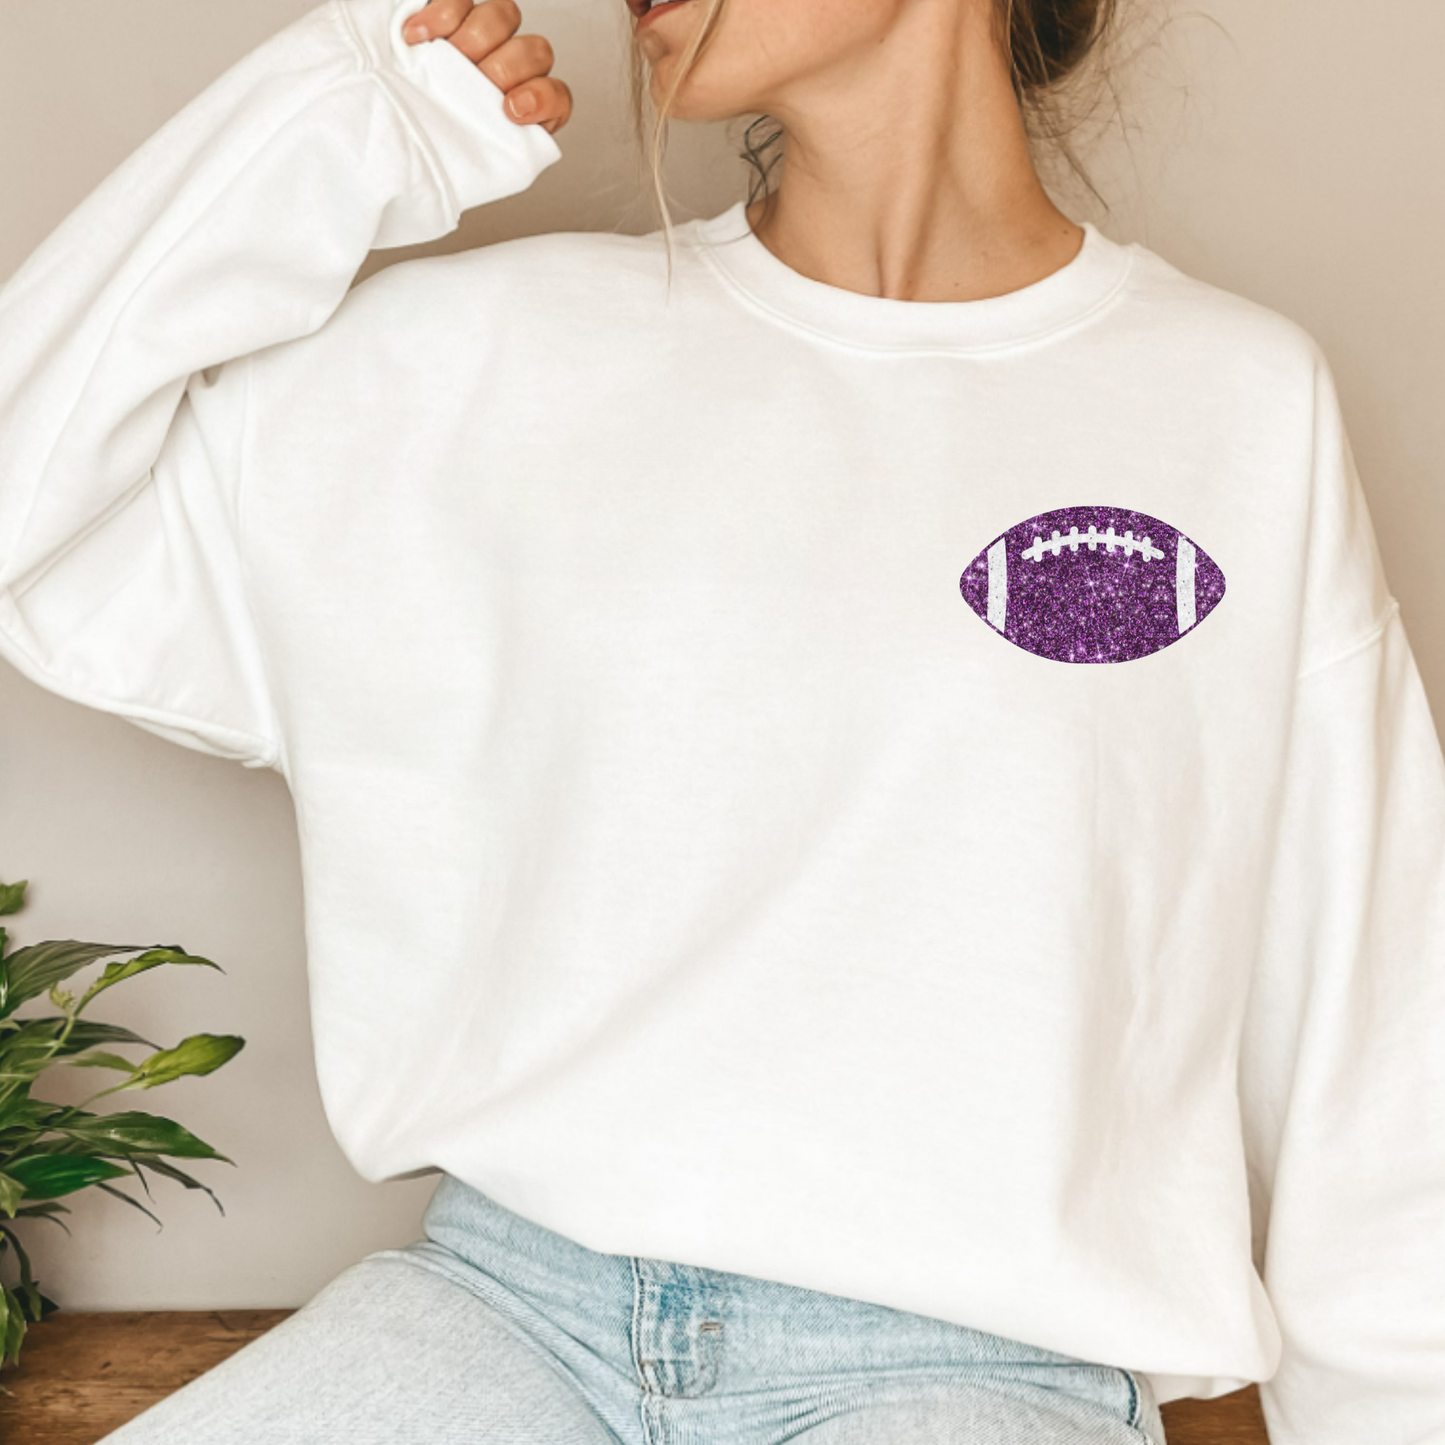 (Shirt not included) FAUX glitter FOOTBALL pocket - Screen print Transfer